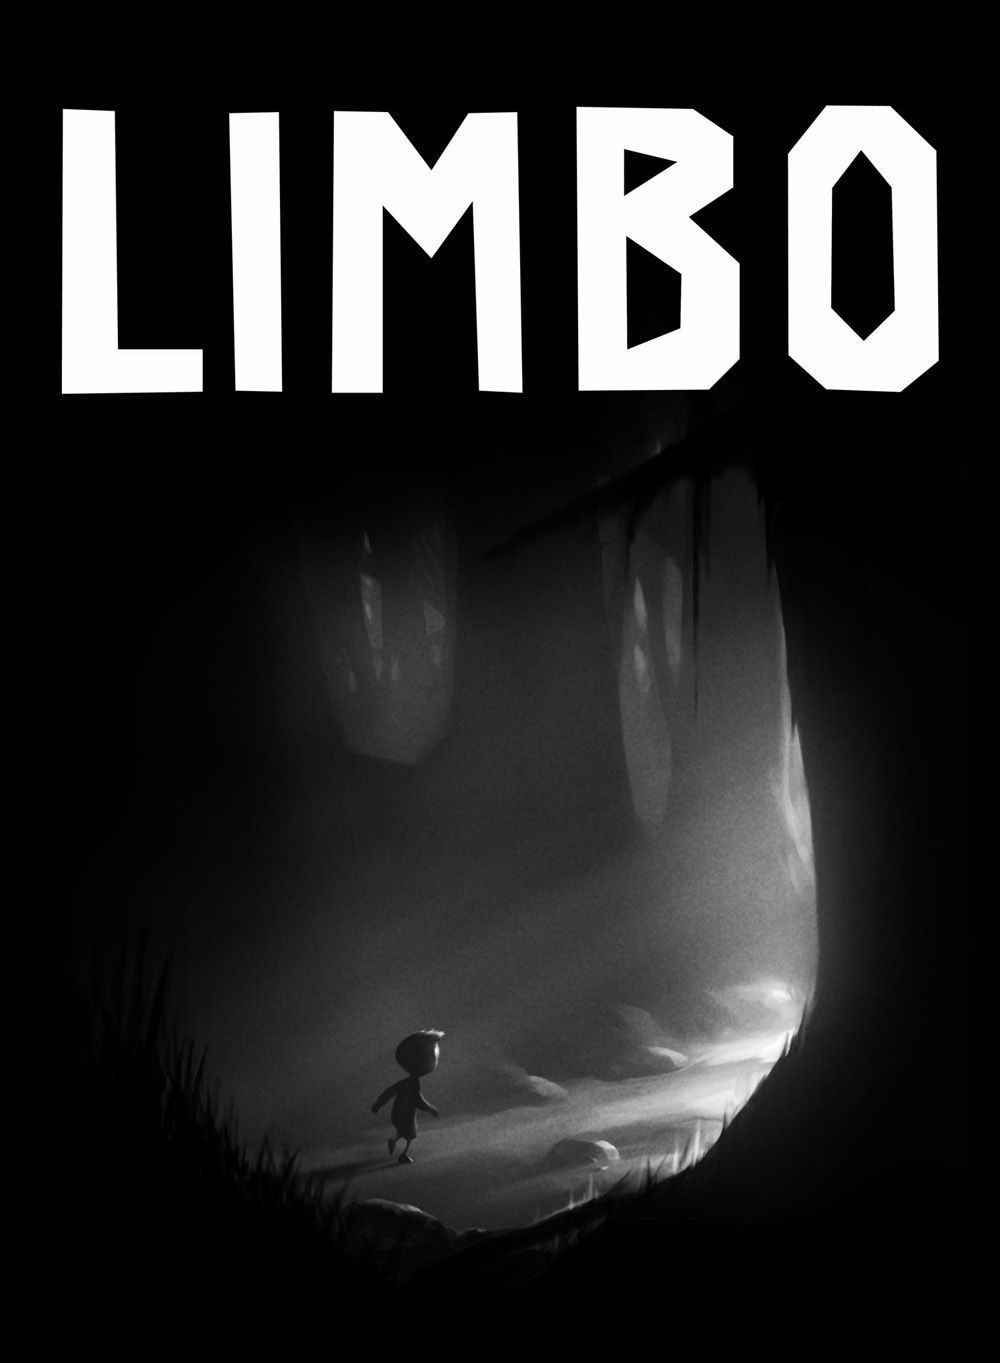 christ in limbo meaning